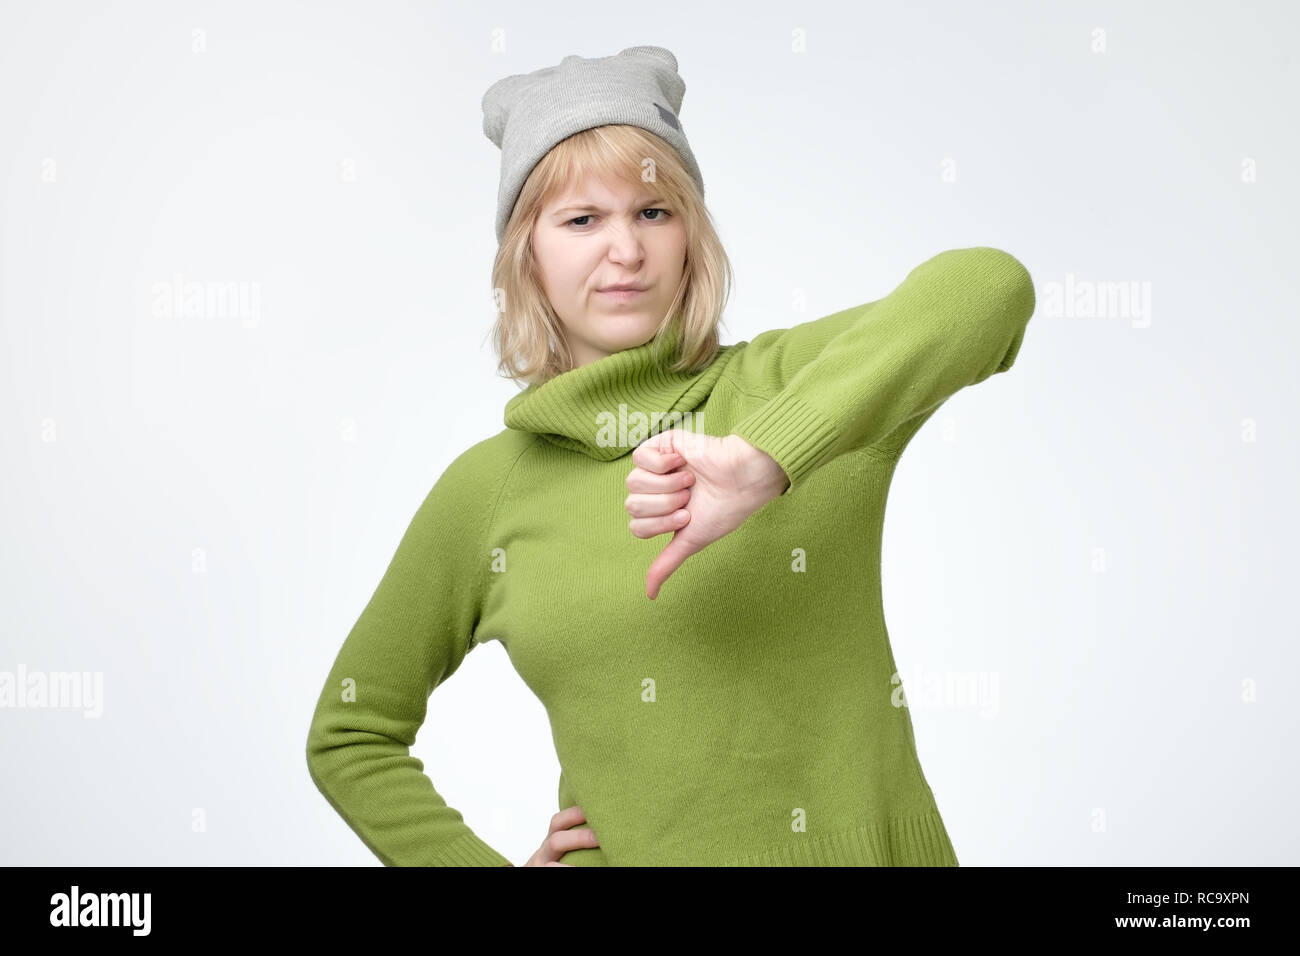 Pretty girl in green sweater and hat doing a bad signal turning thumb down over white background Stock Photo